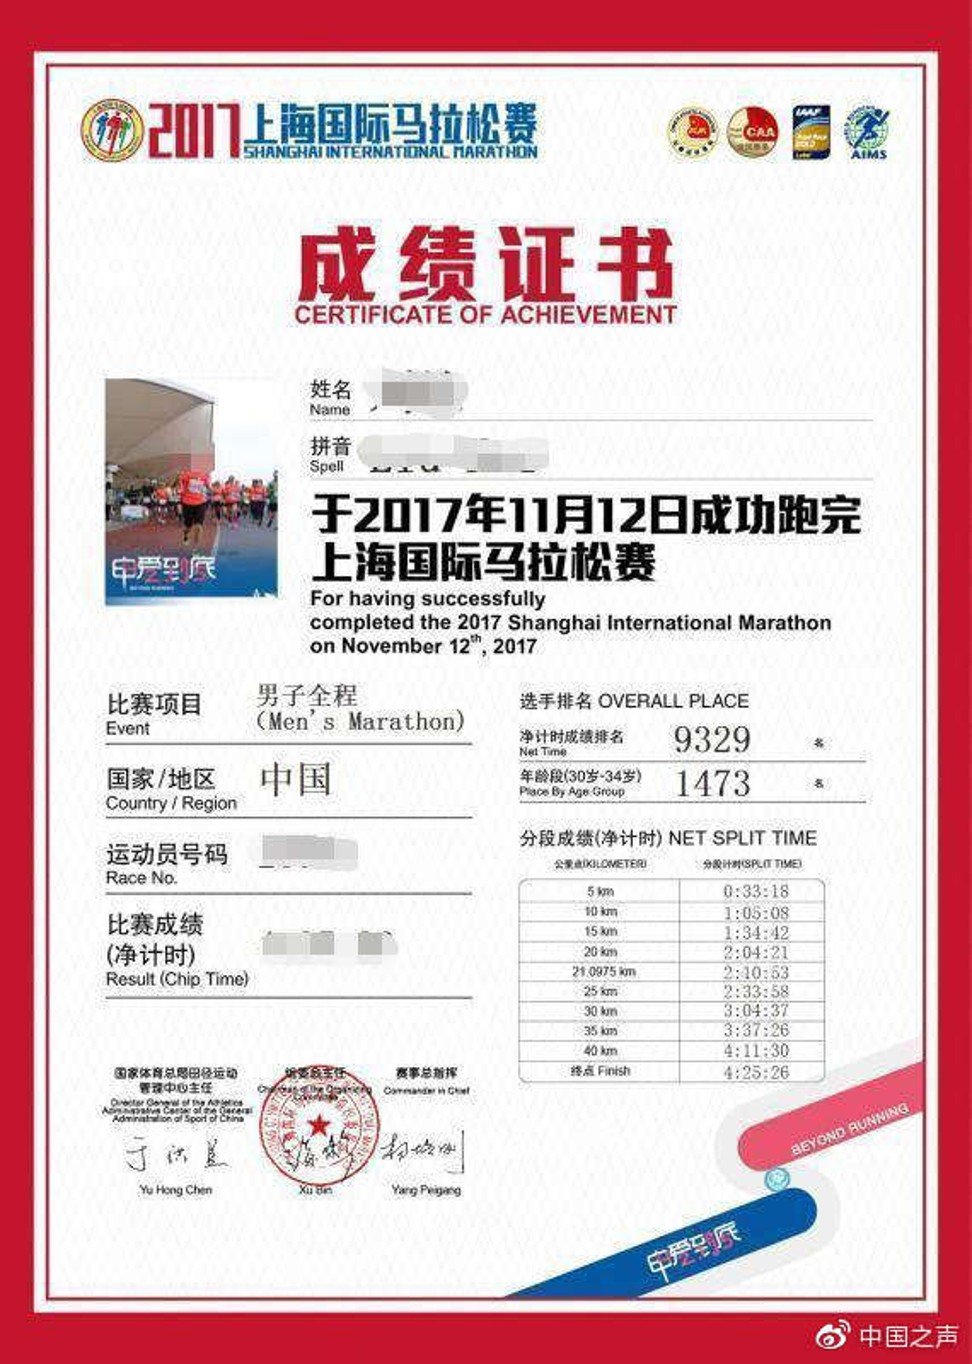 A running industry insider says fake marathon certification may be used by Chinese runners to qualify for the Boston Marathon. Photo: Weibo